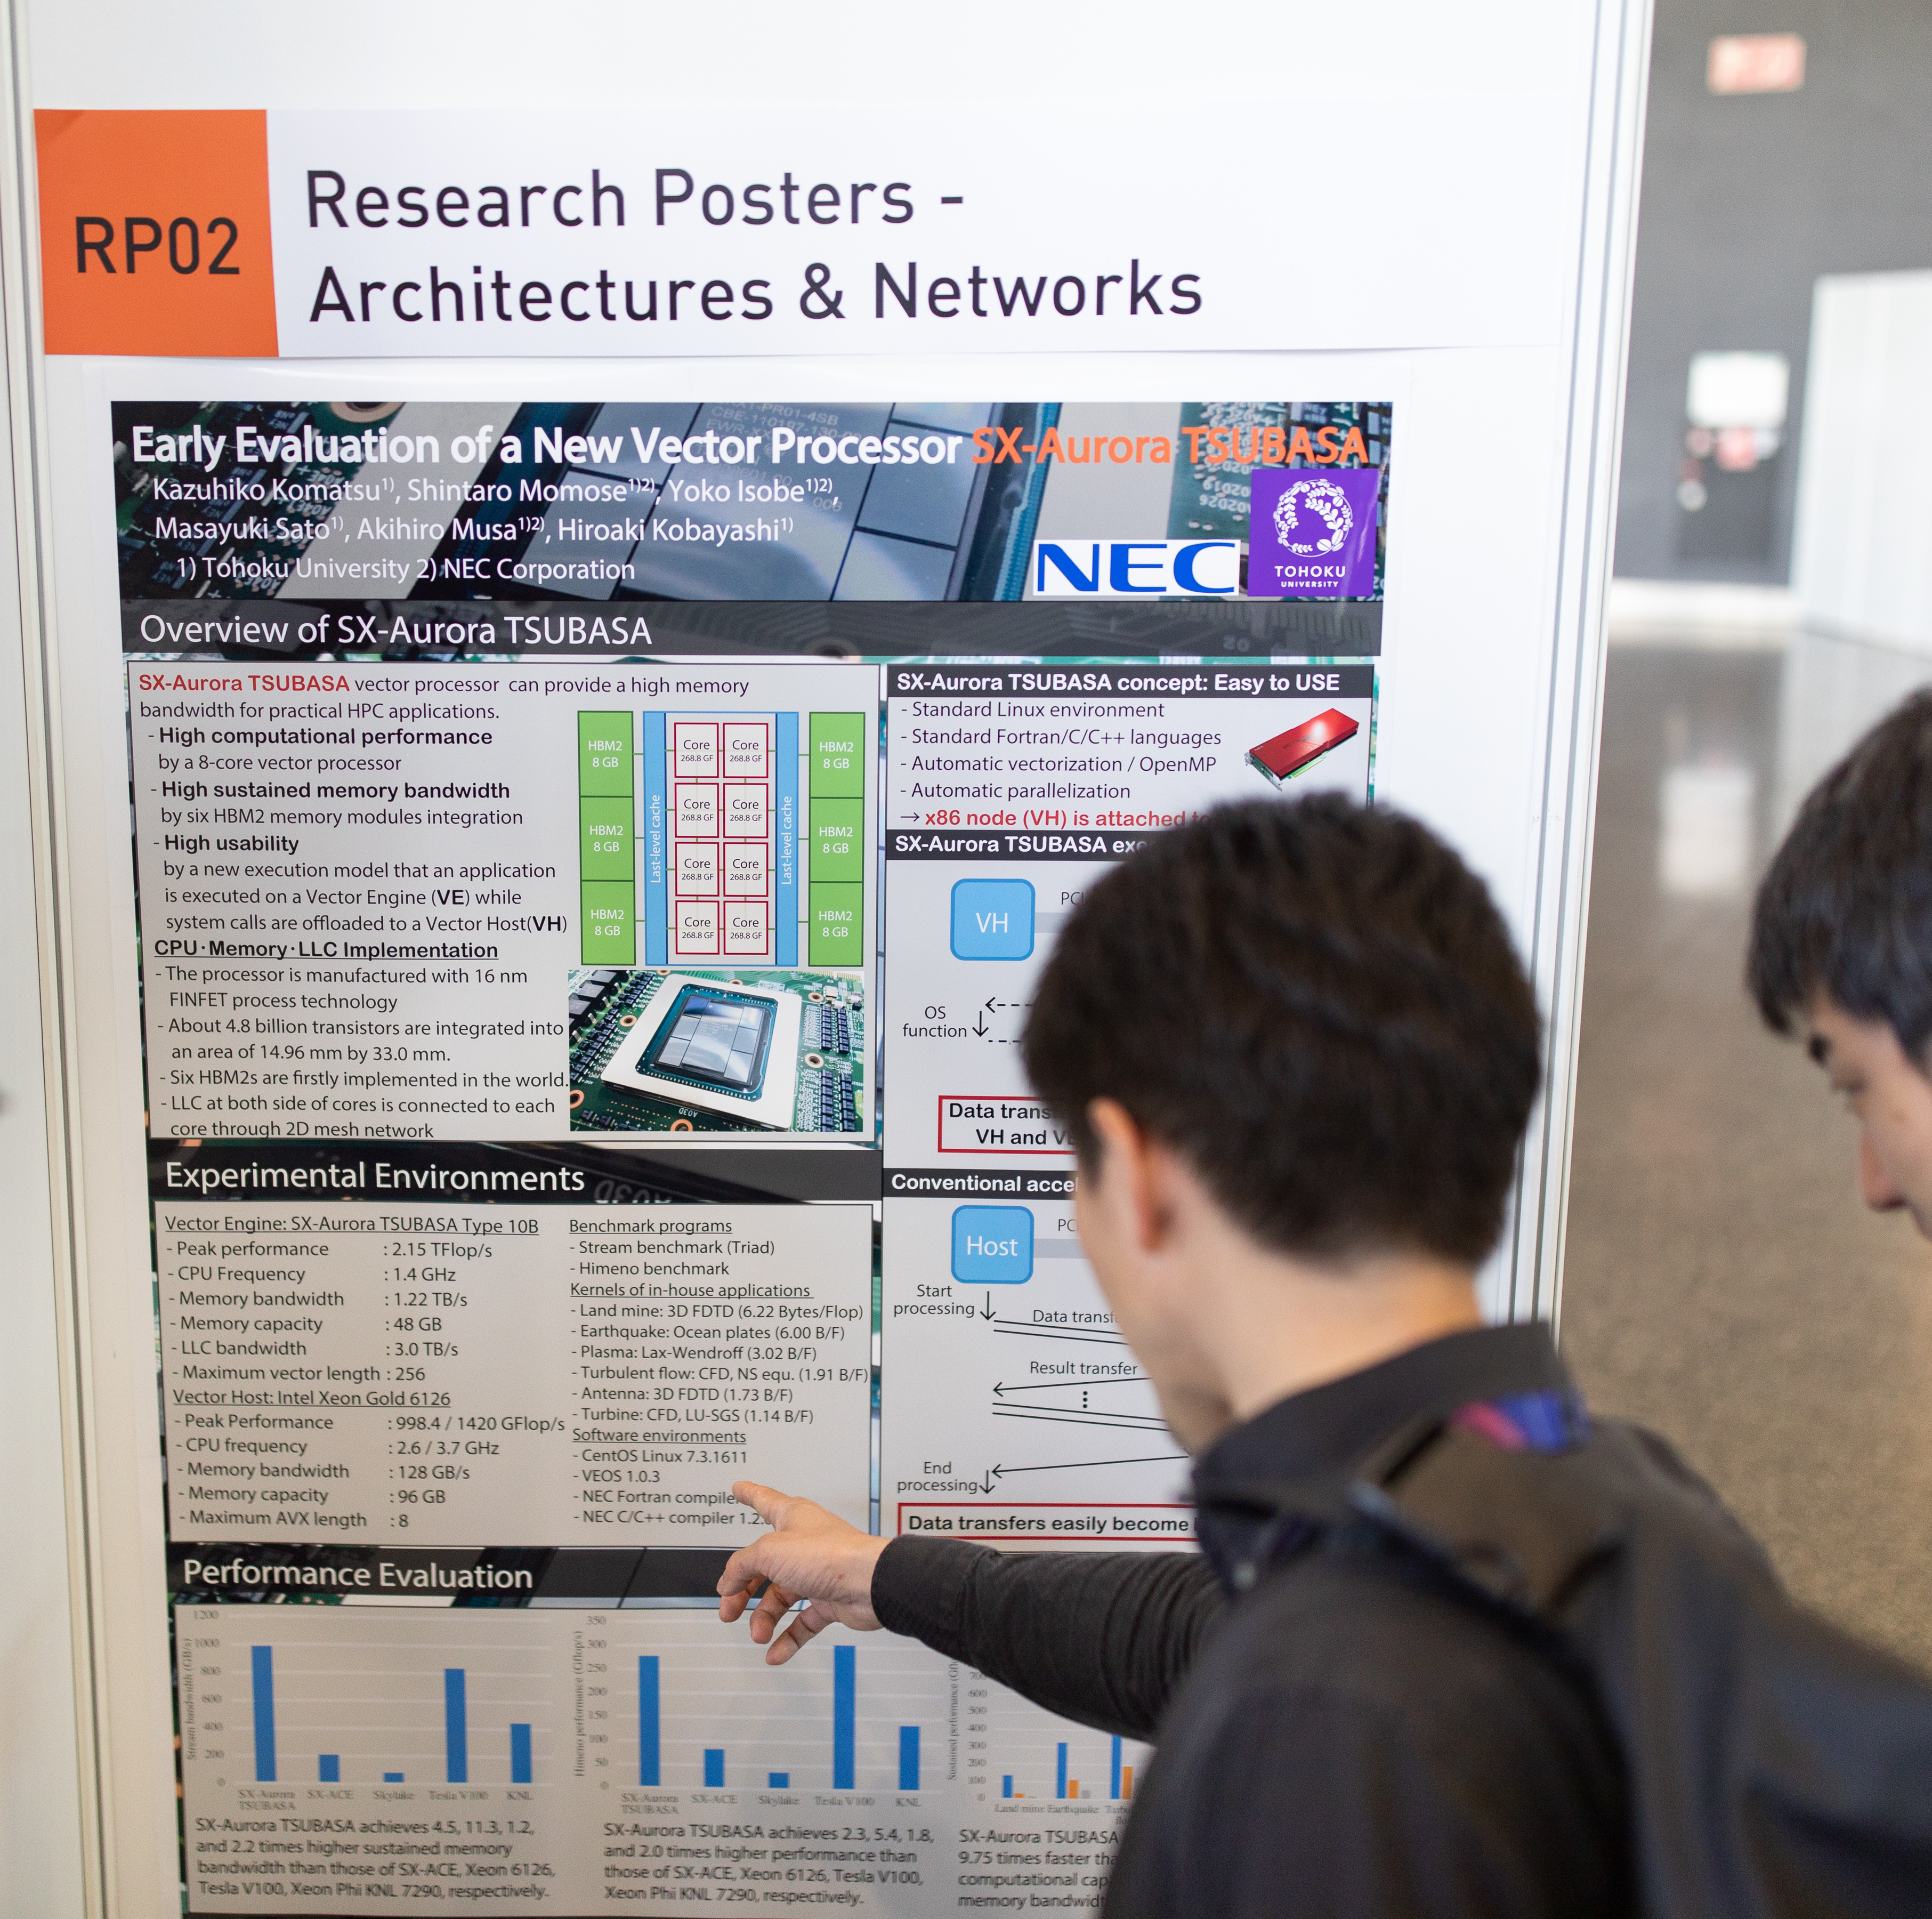 ISC2018 Research Posters